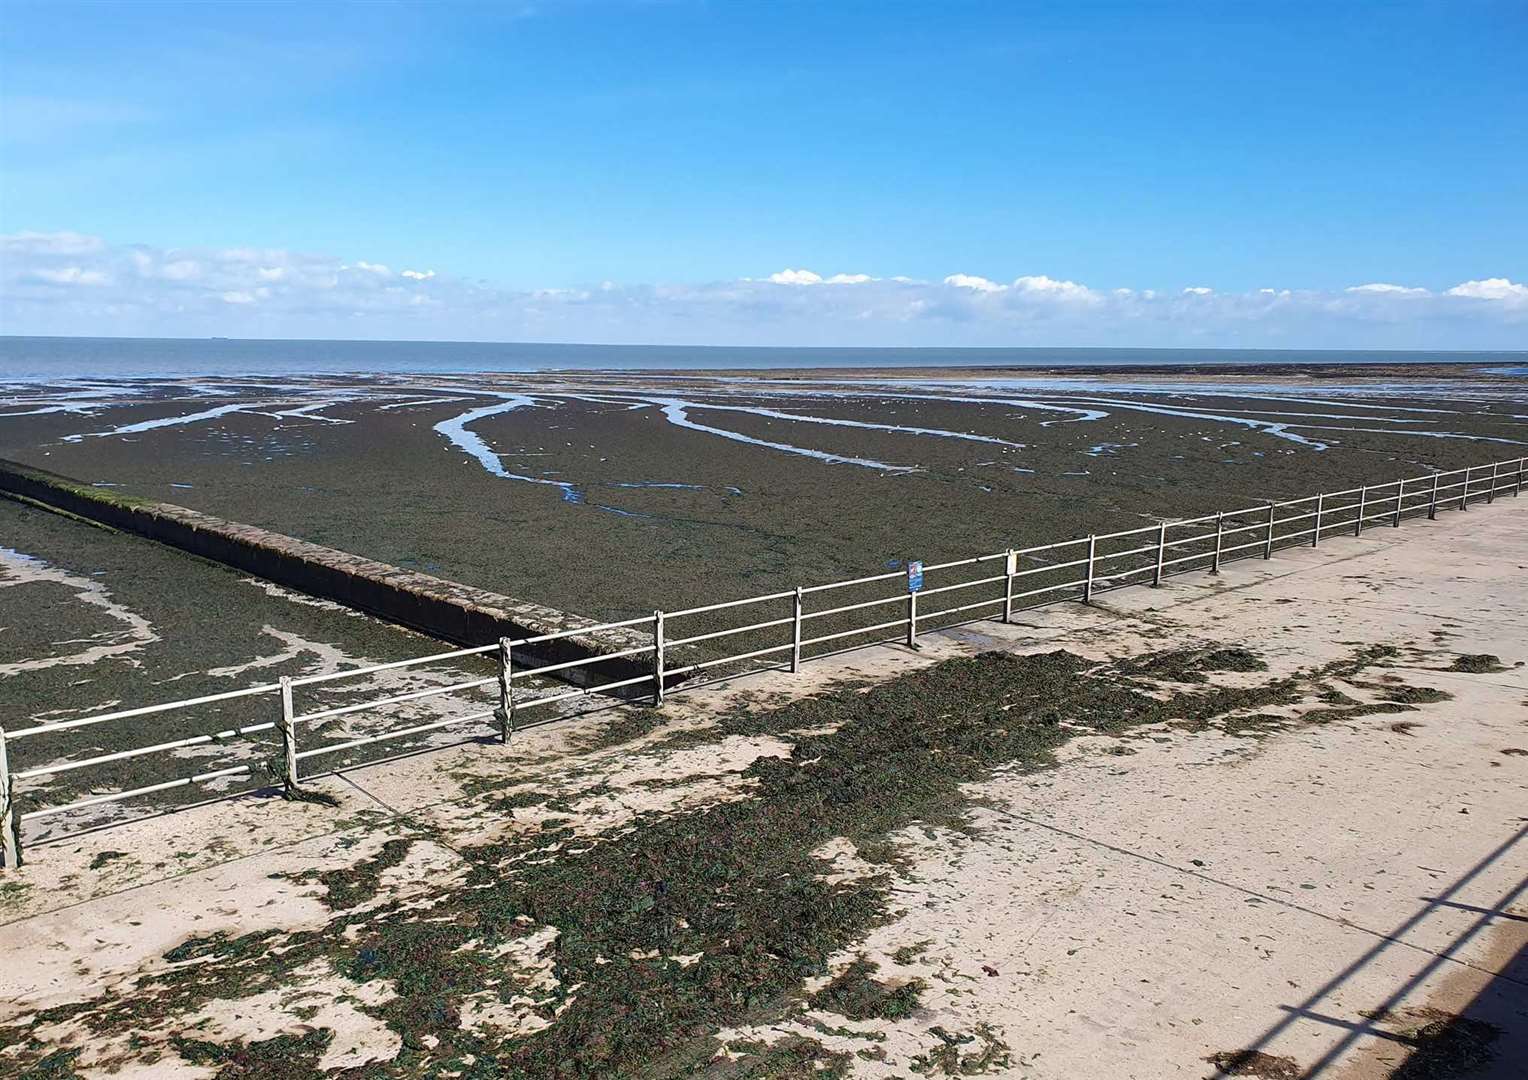 Residents of Birchington have said its the 'worst they have seen the seaweed' on Minnis Bay. Picture: Martin Clarke